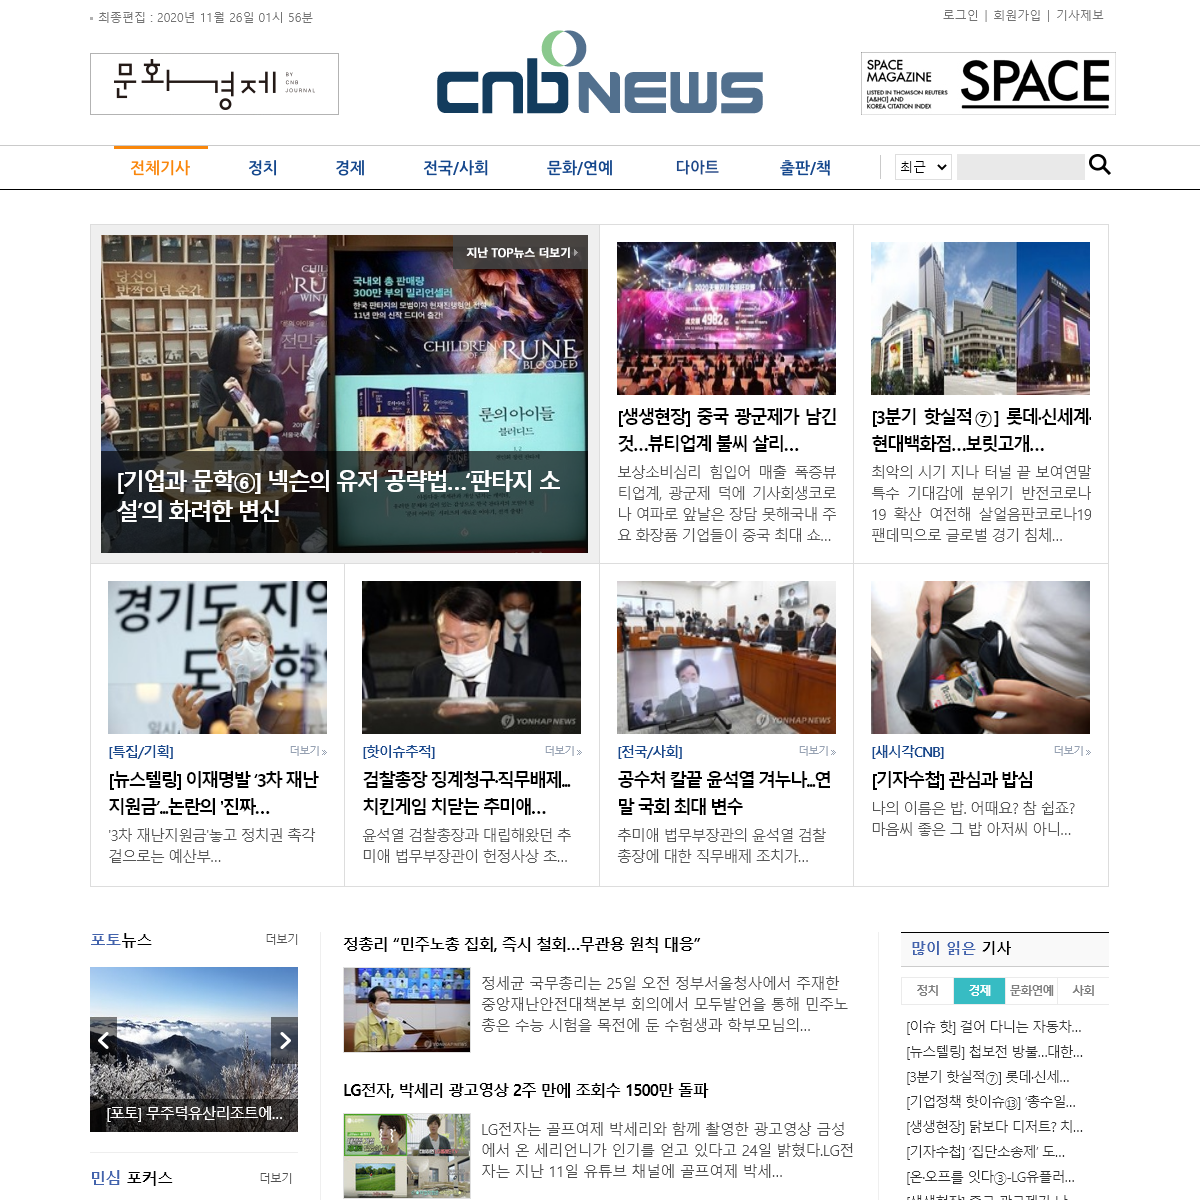 A complete backup of cnbnews.com